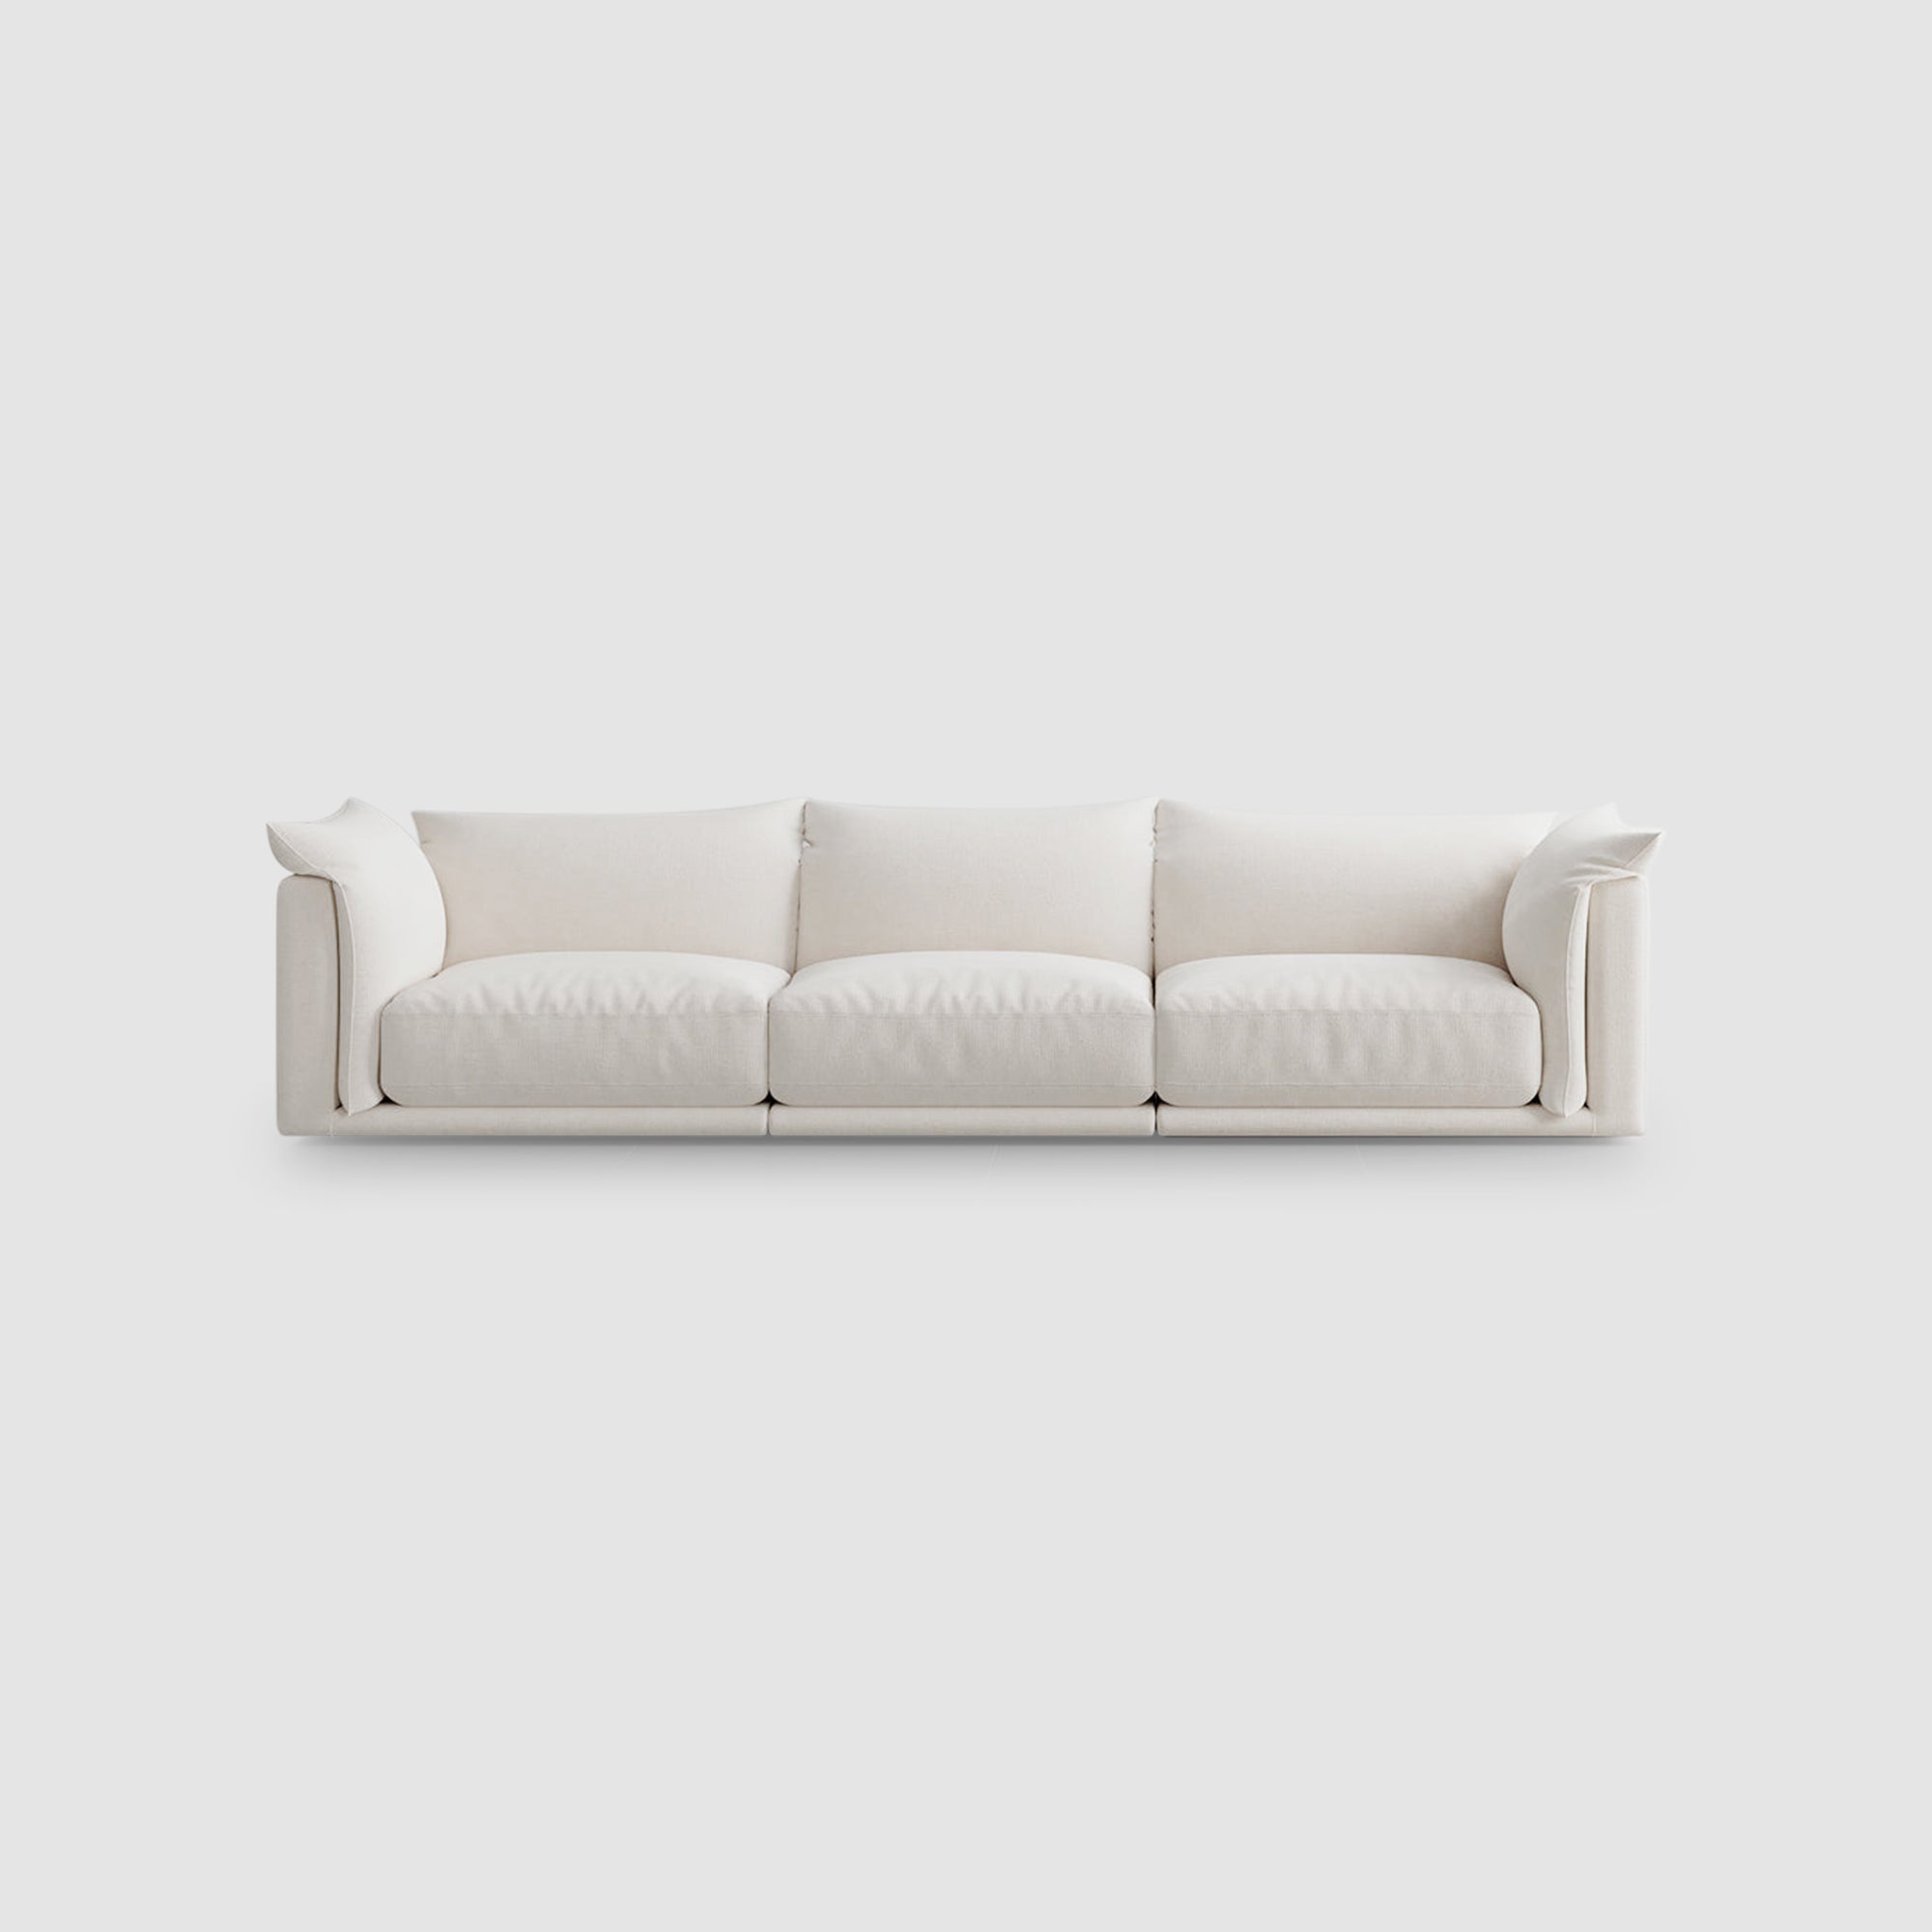 Elegant white three-seater sofa with plush cushions, perfect for minimalist and modern home interiors.